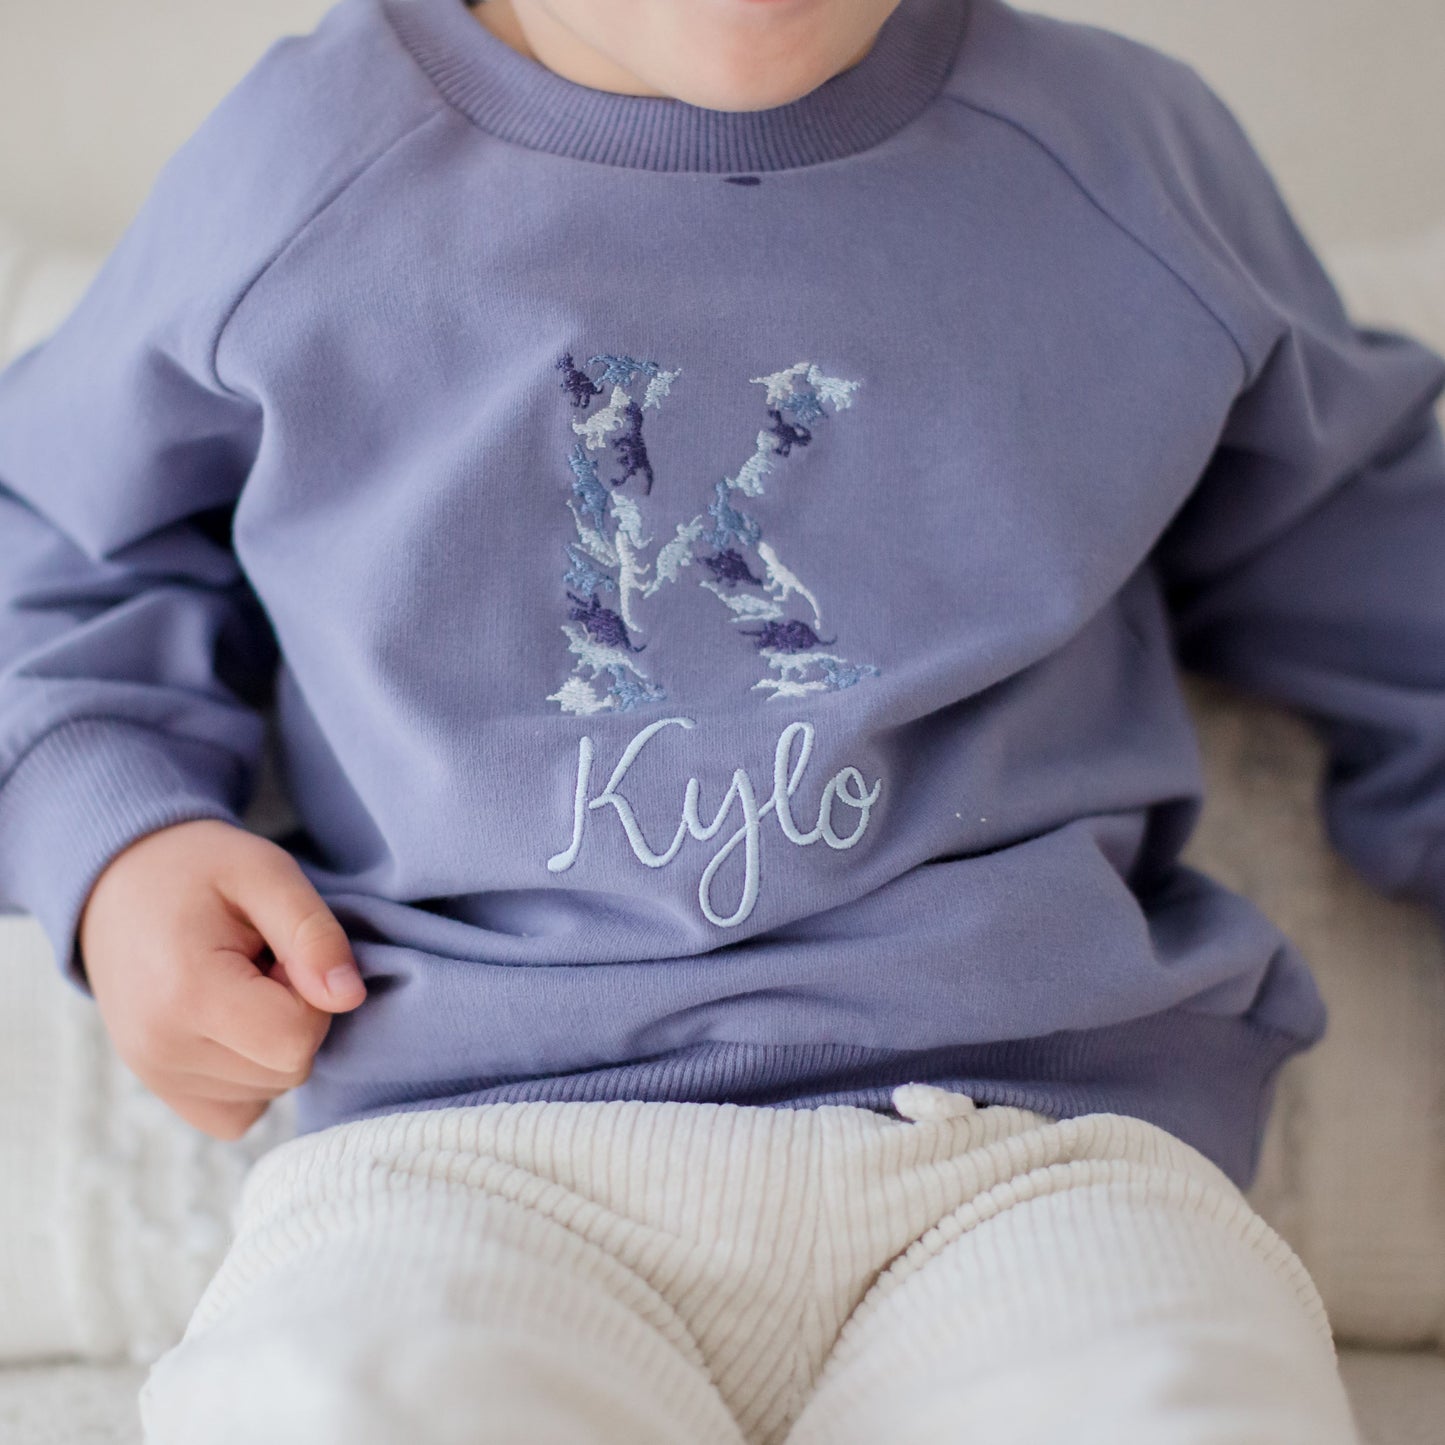 blue baby and toddler crewneck embroidered with a dinosaur name design using a blue colour theme